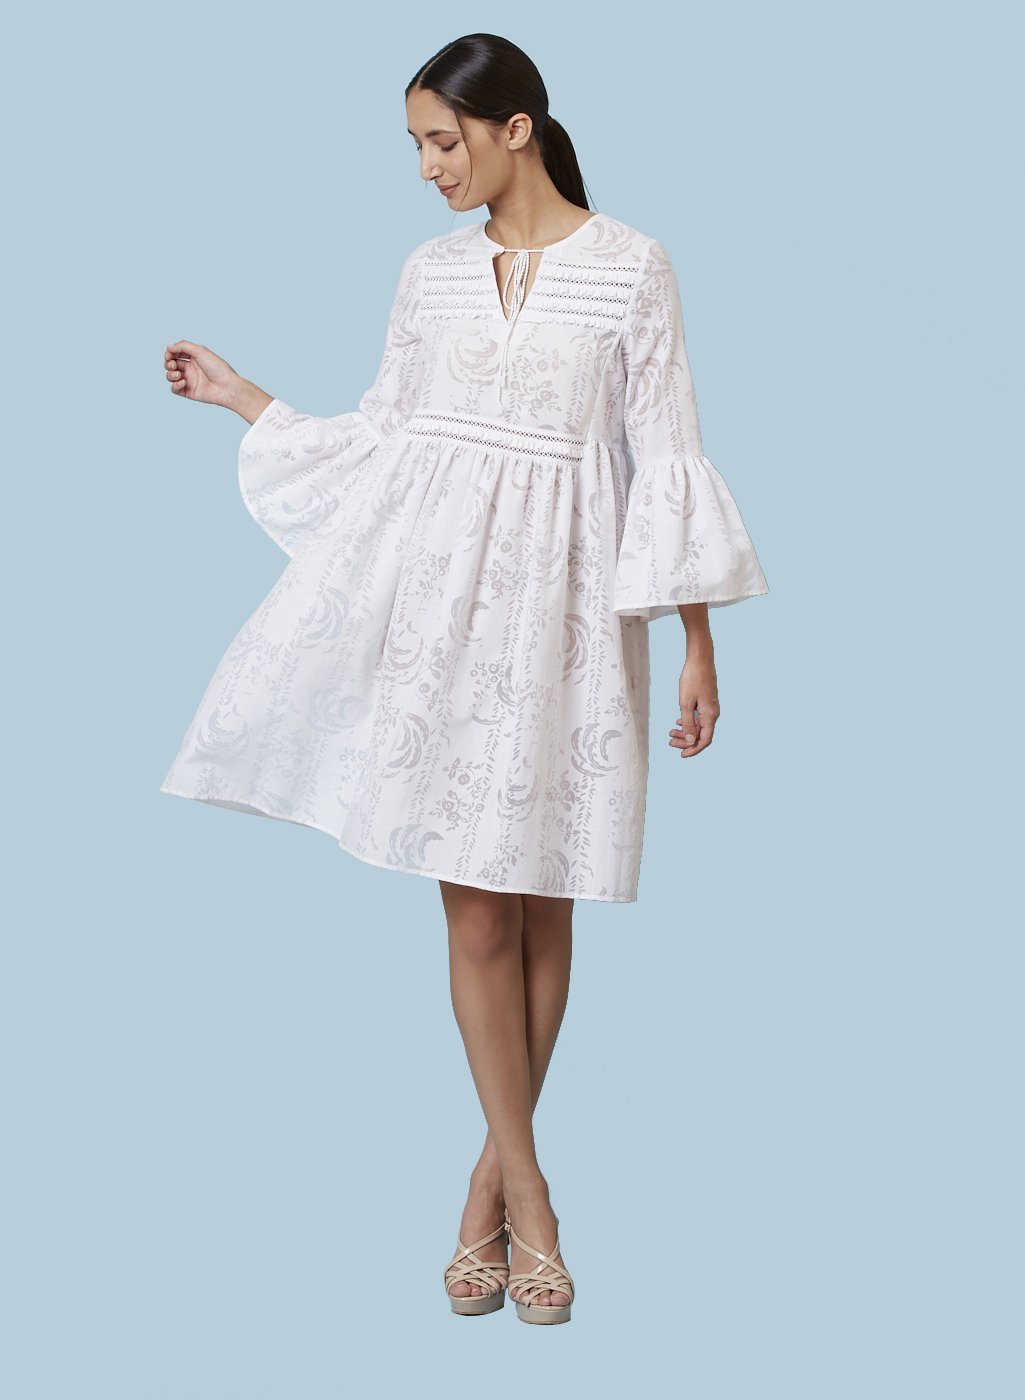 MAIA EMBROIDERED DRESS - Genes online store 2020